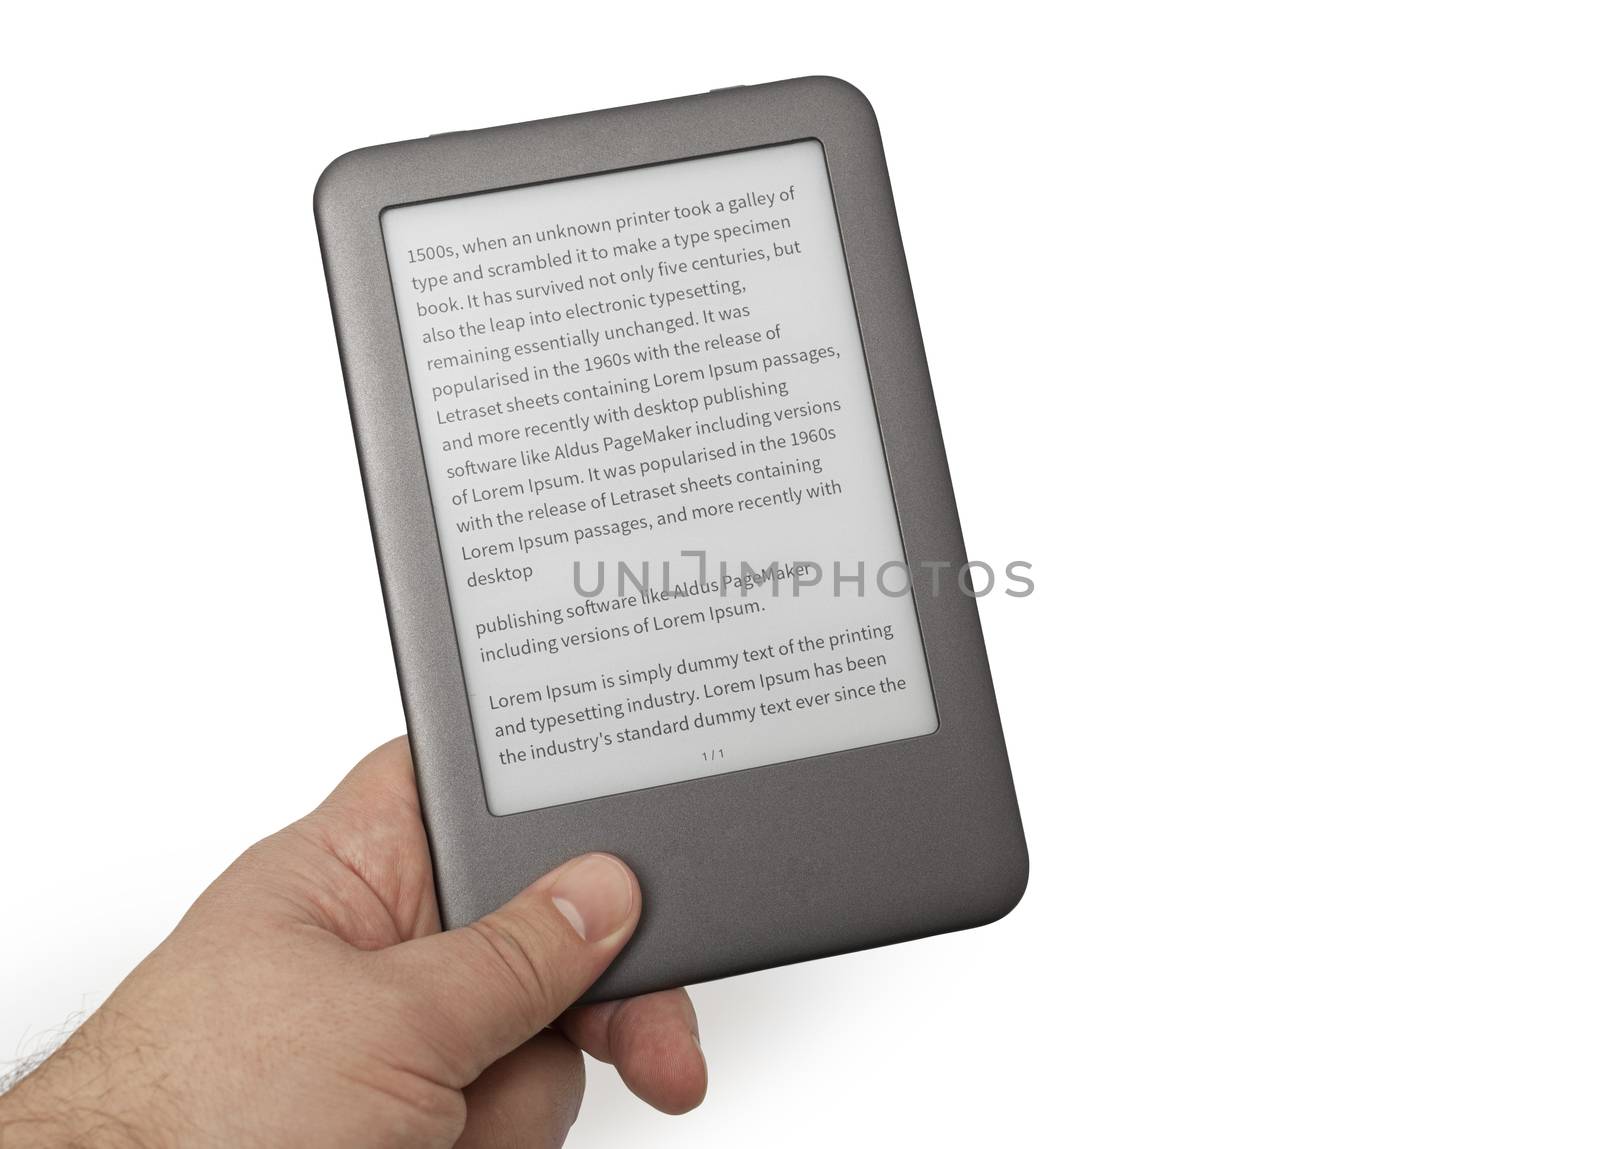 Holding E-book reader in hand. Include clipping path for screen and book with hands. LOREM IPSUM text on e-book screen.